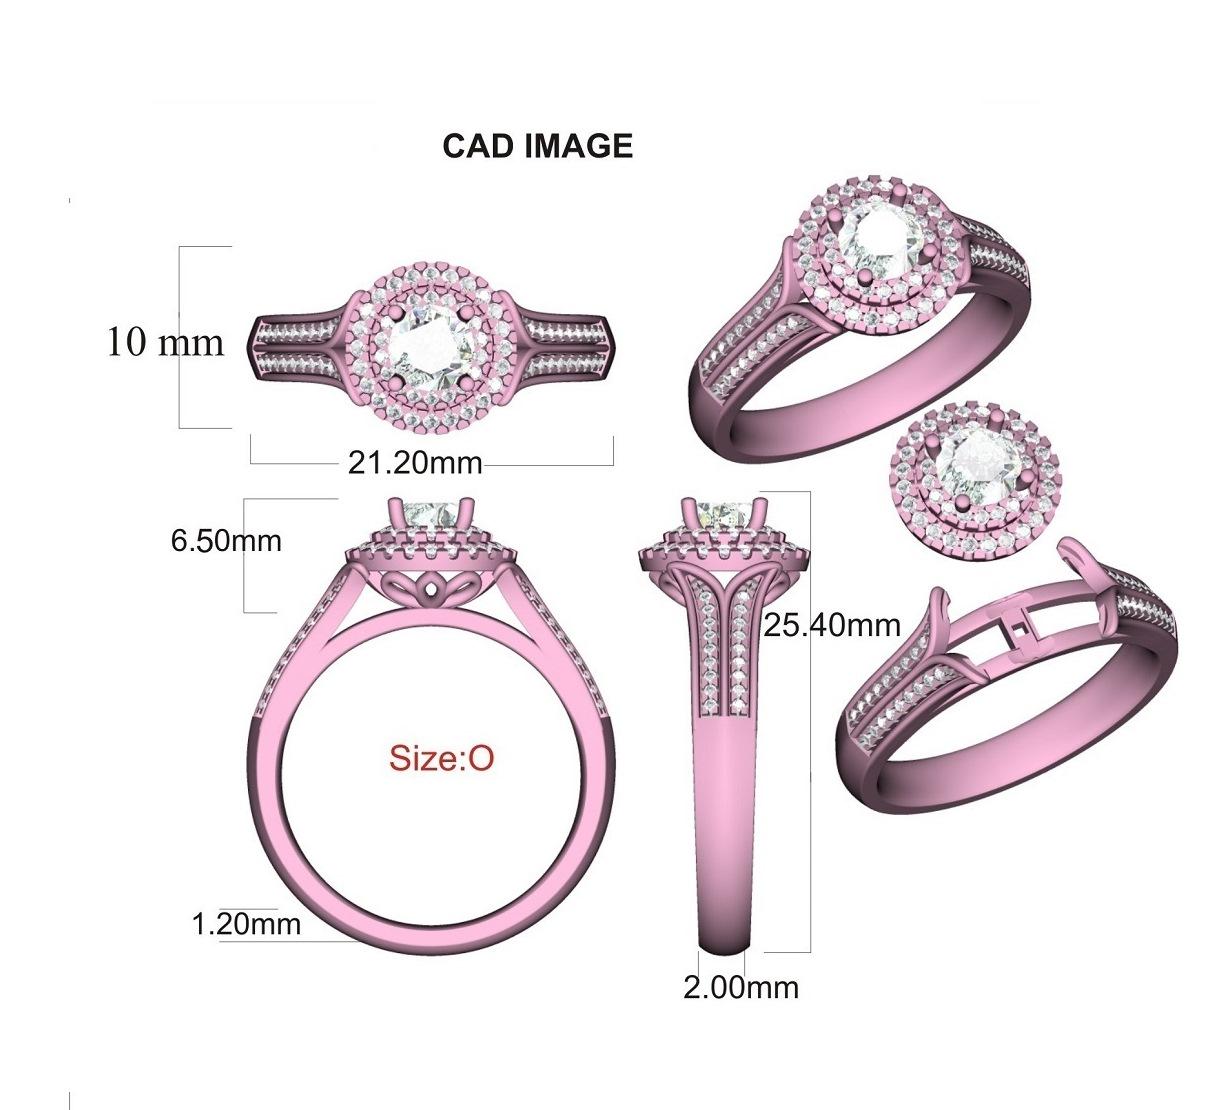 This Halo Engagement Ring is expertly crafted in 18 Karat Rose Gold which features 0.47 ct centre stone and 0.28 ct of double diamond frame and lined shank diamonds in stackable prong and prong setting. The diamonds are natural, not treated and